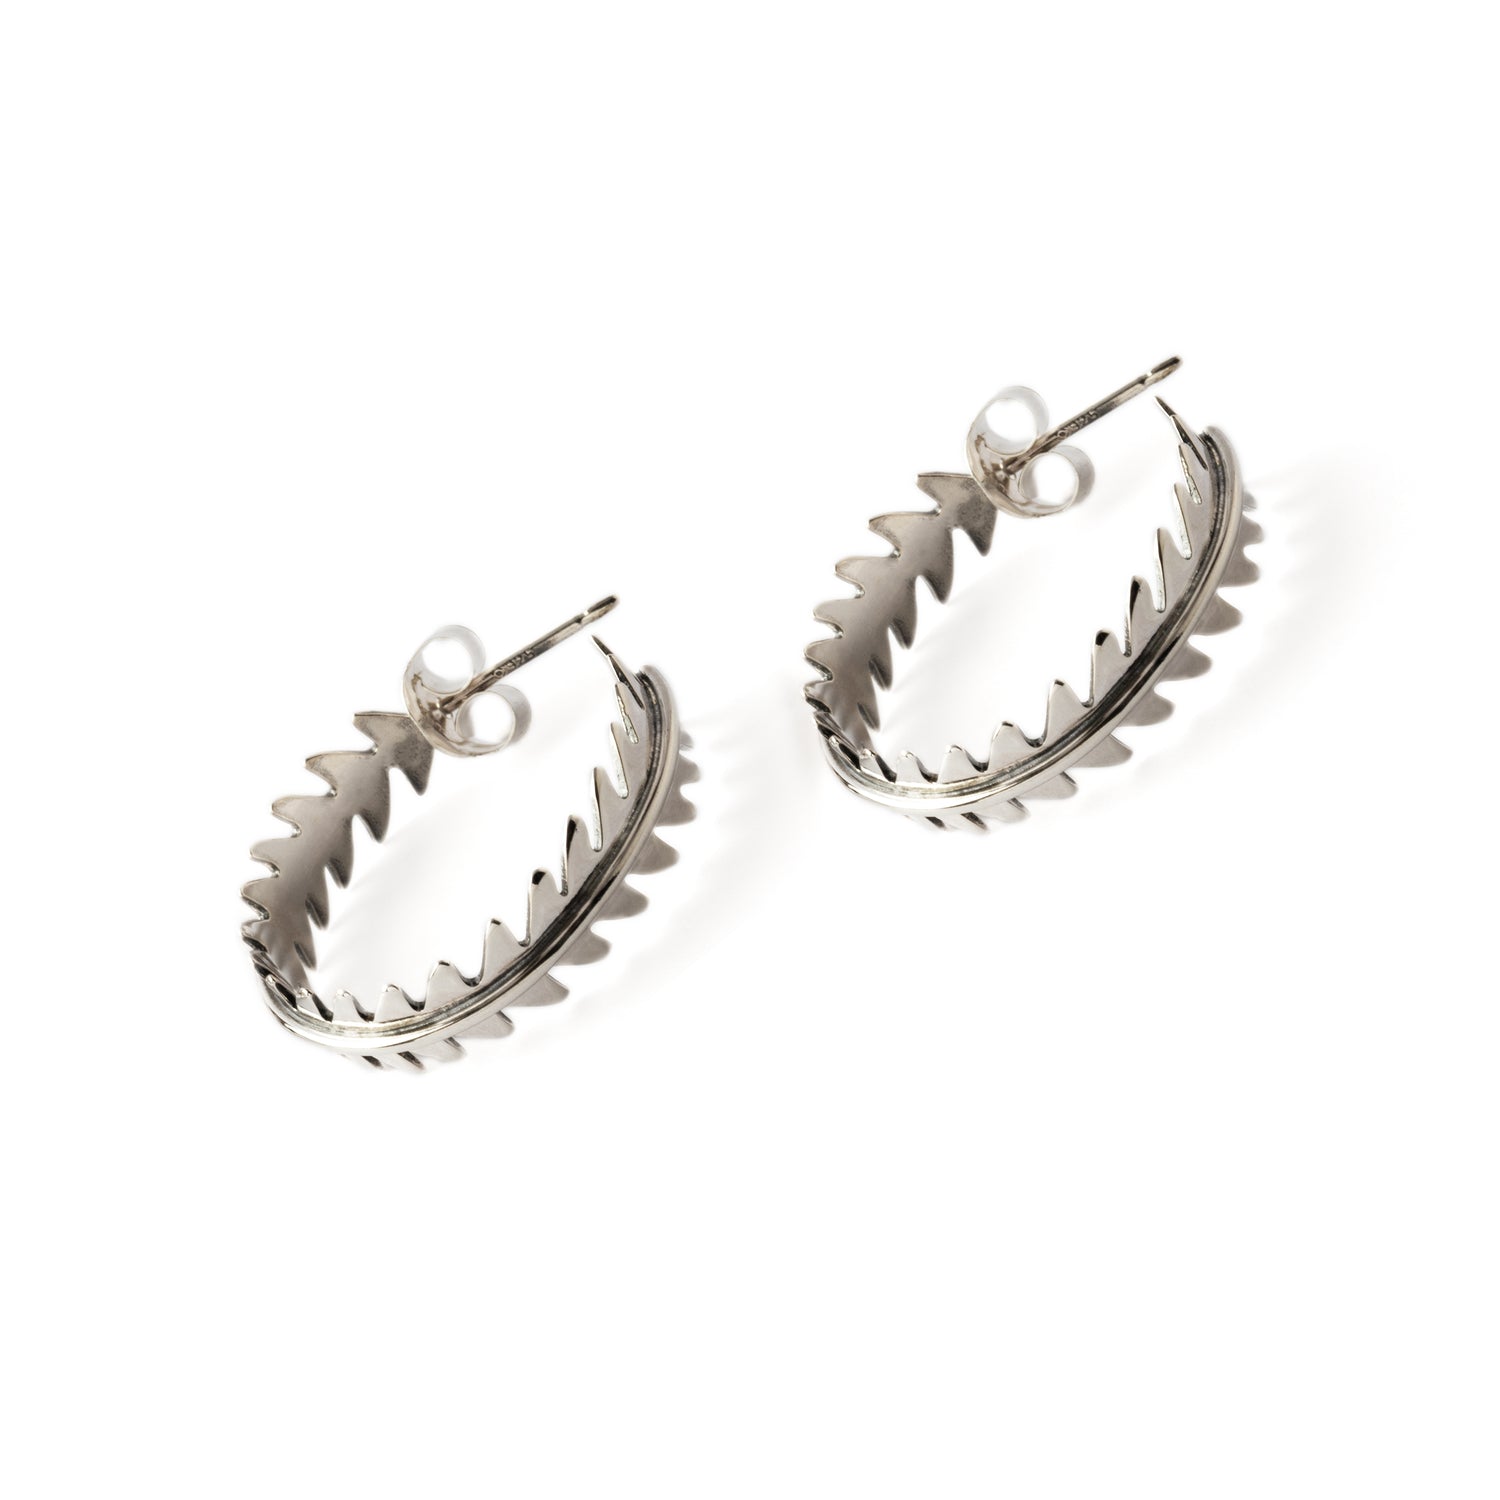 Sterling silver leaf shaped open hoops earrings with a push back closure back view